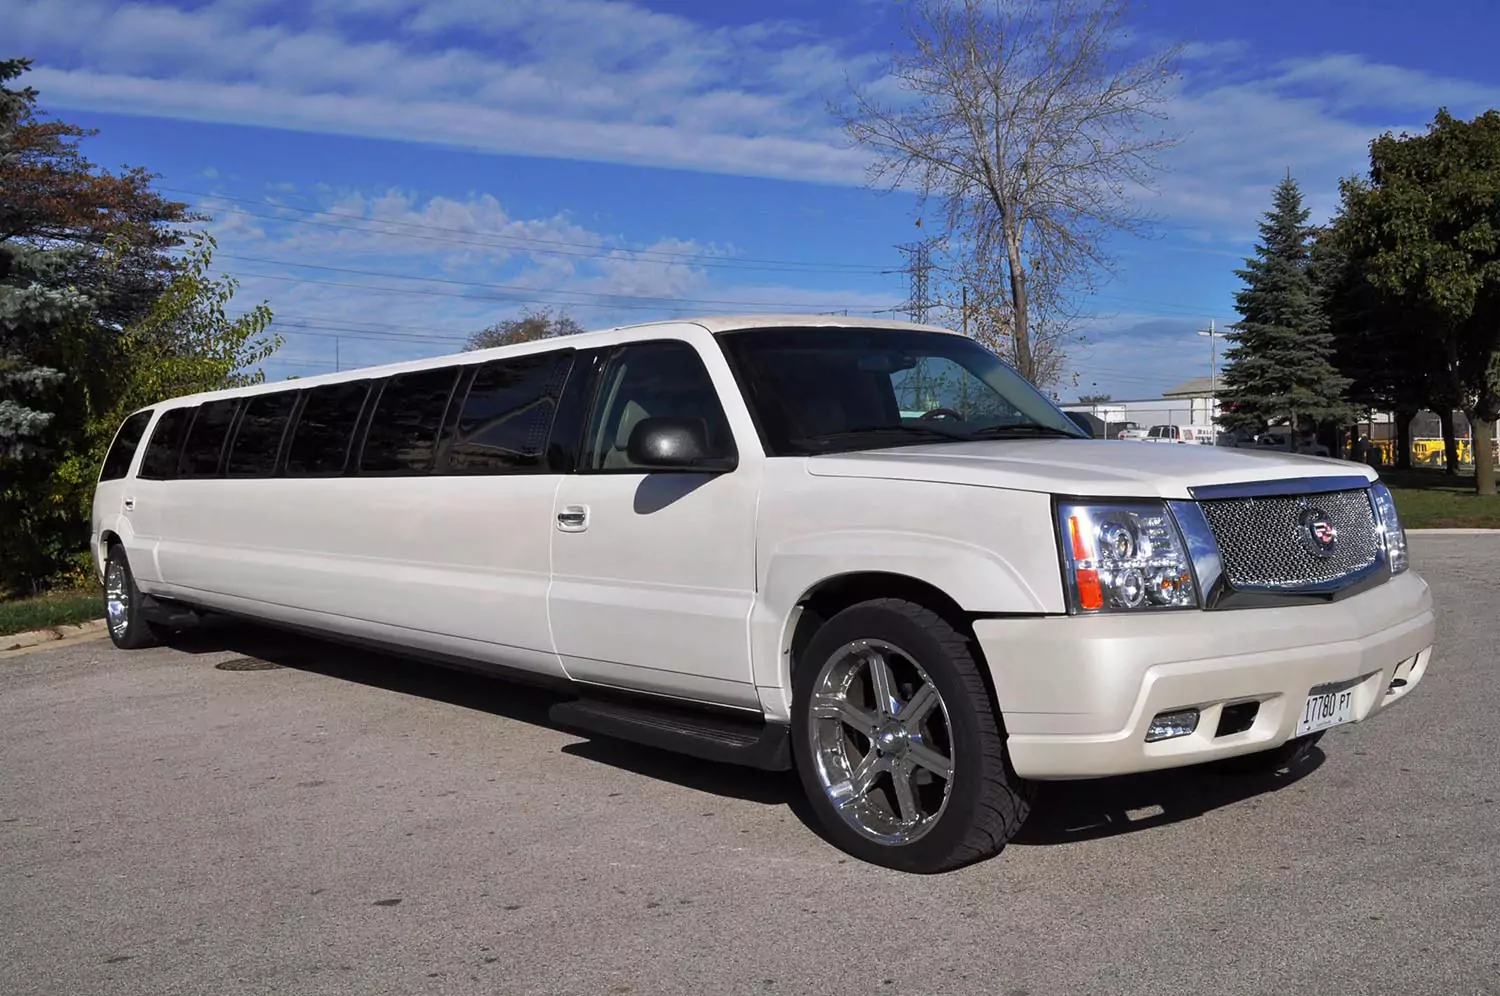 Top Perks of Chauffeured Limo Rentals in Chicago